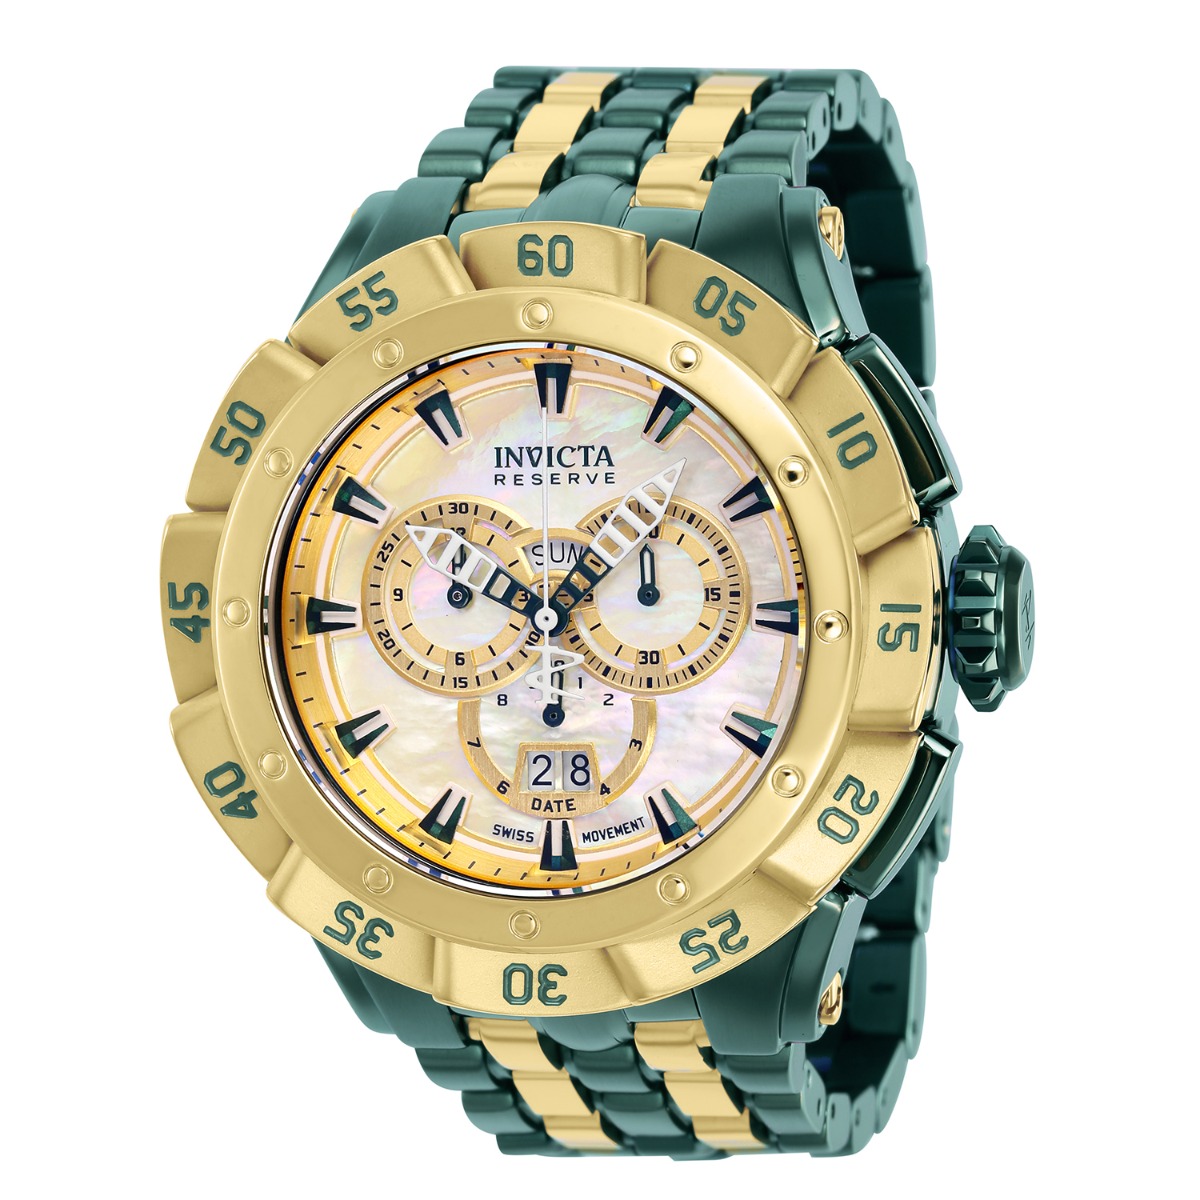 ejer lidenskabelig Dom Invicta Ripsaw Men's Watches (Mod: 38803) | Invicta Watches